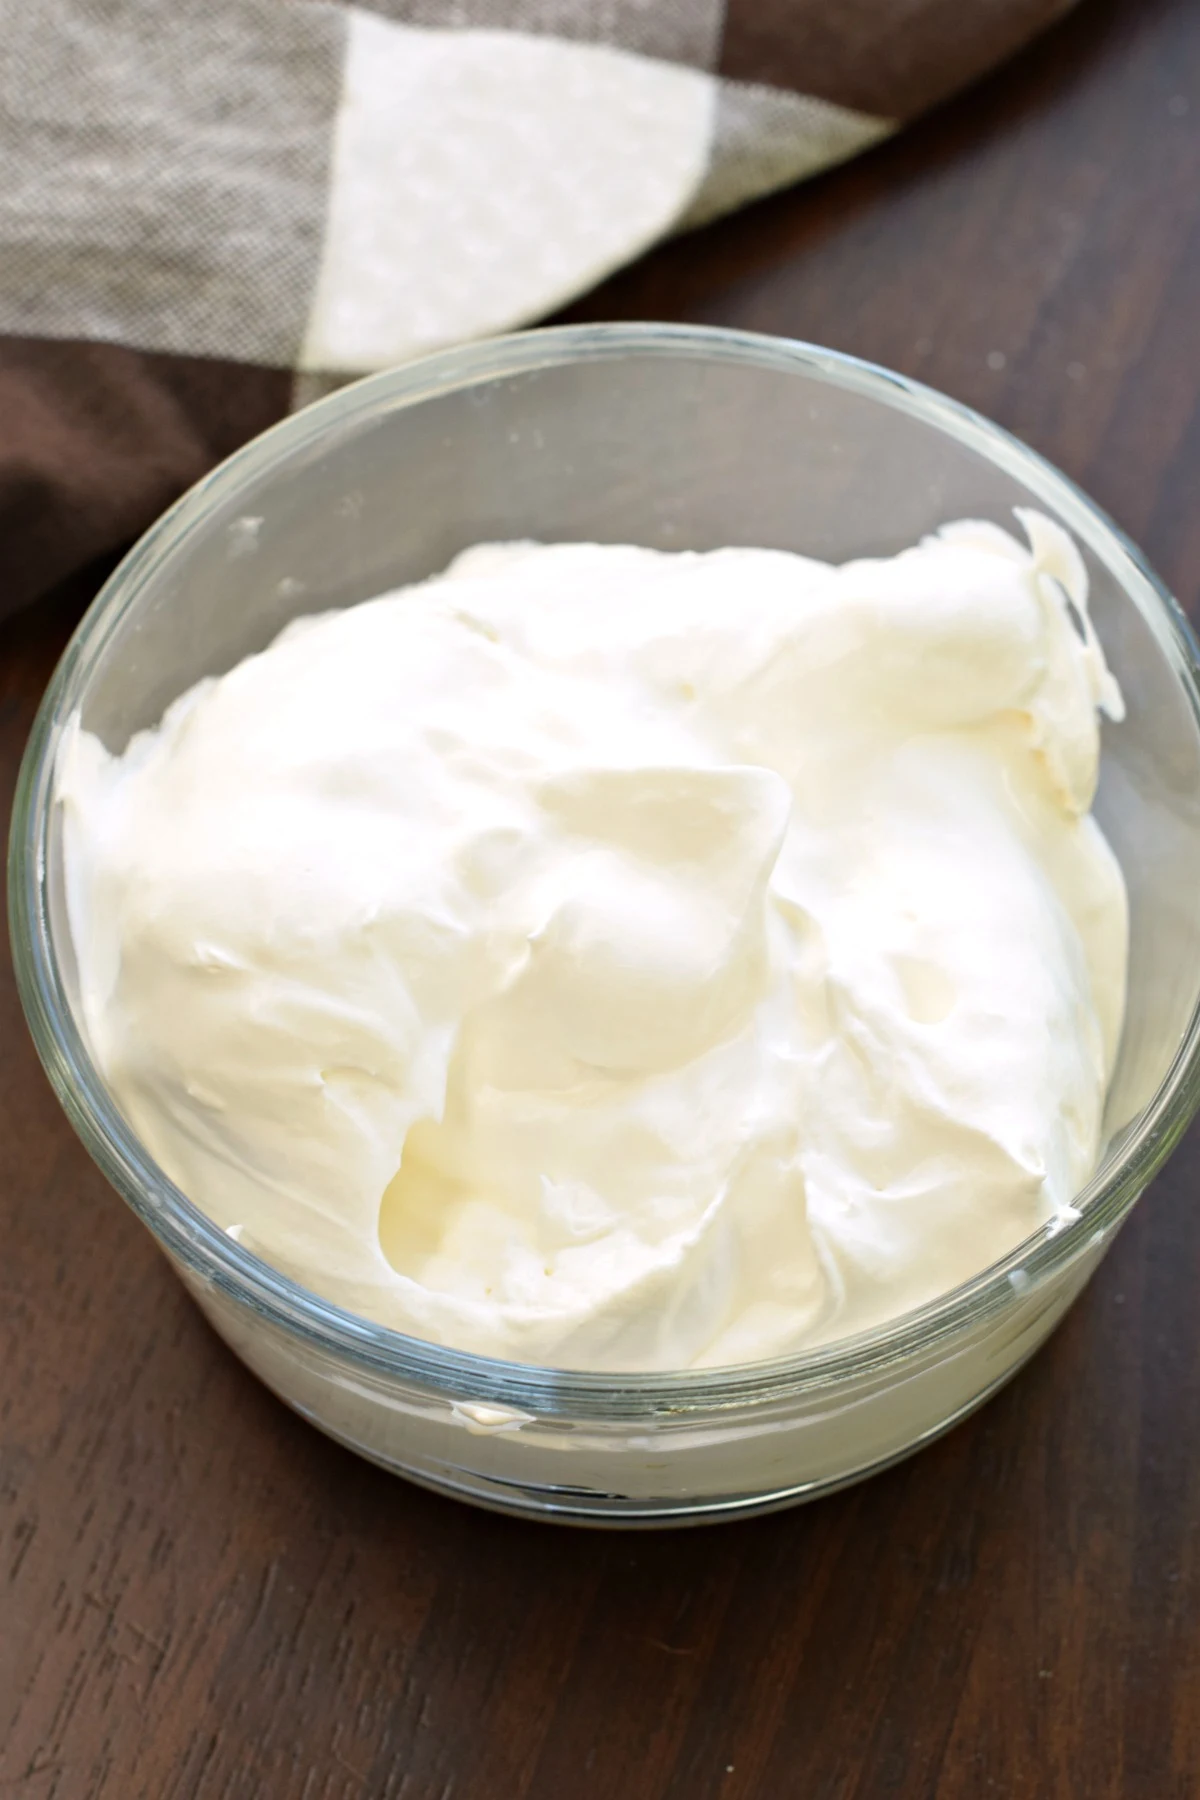 Whipped cream in a clear glass bowl.